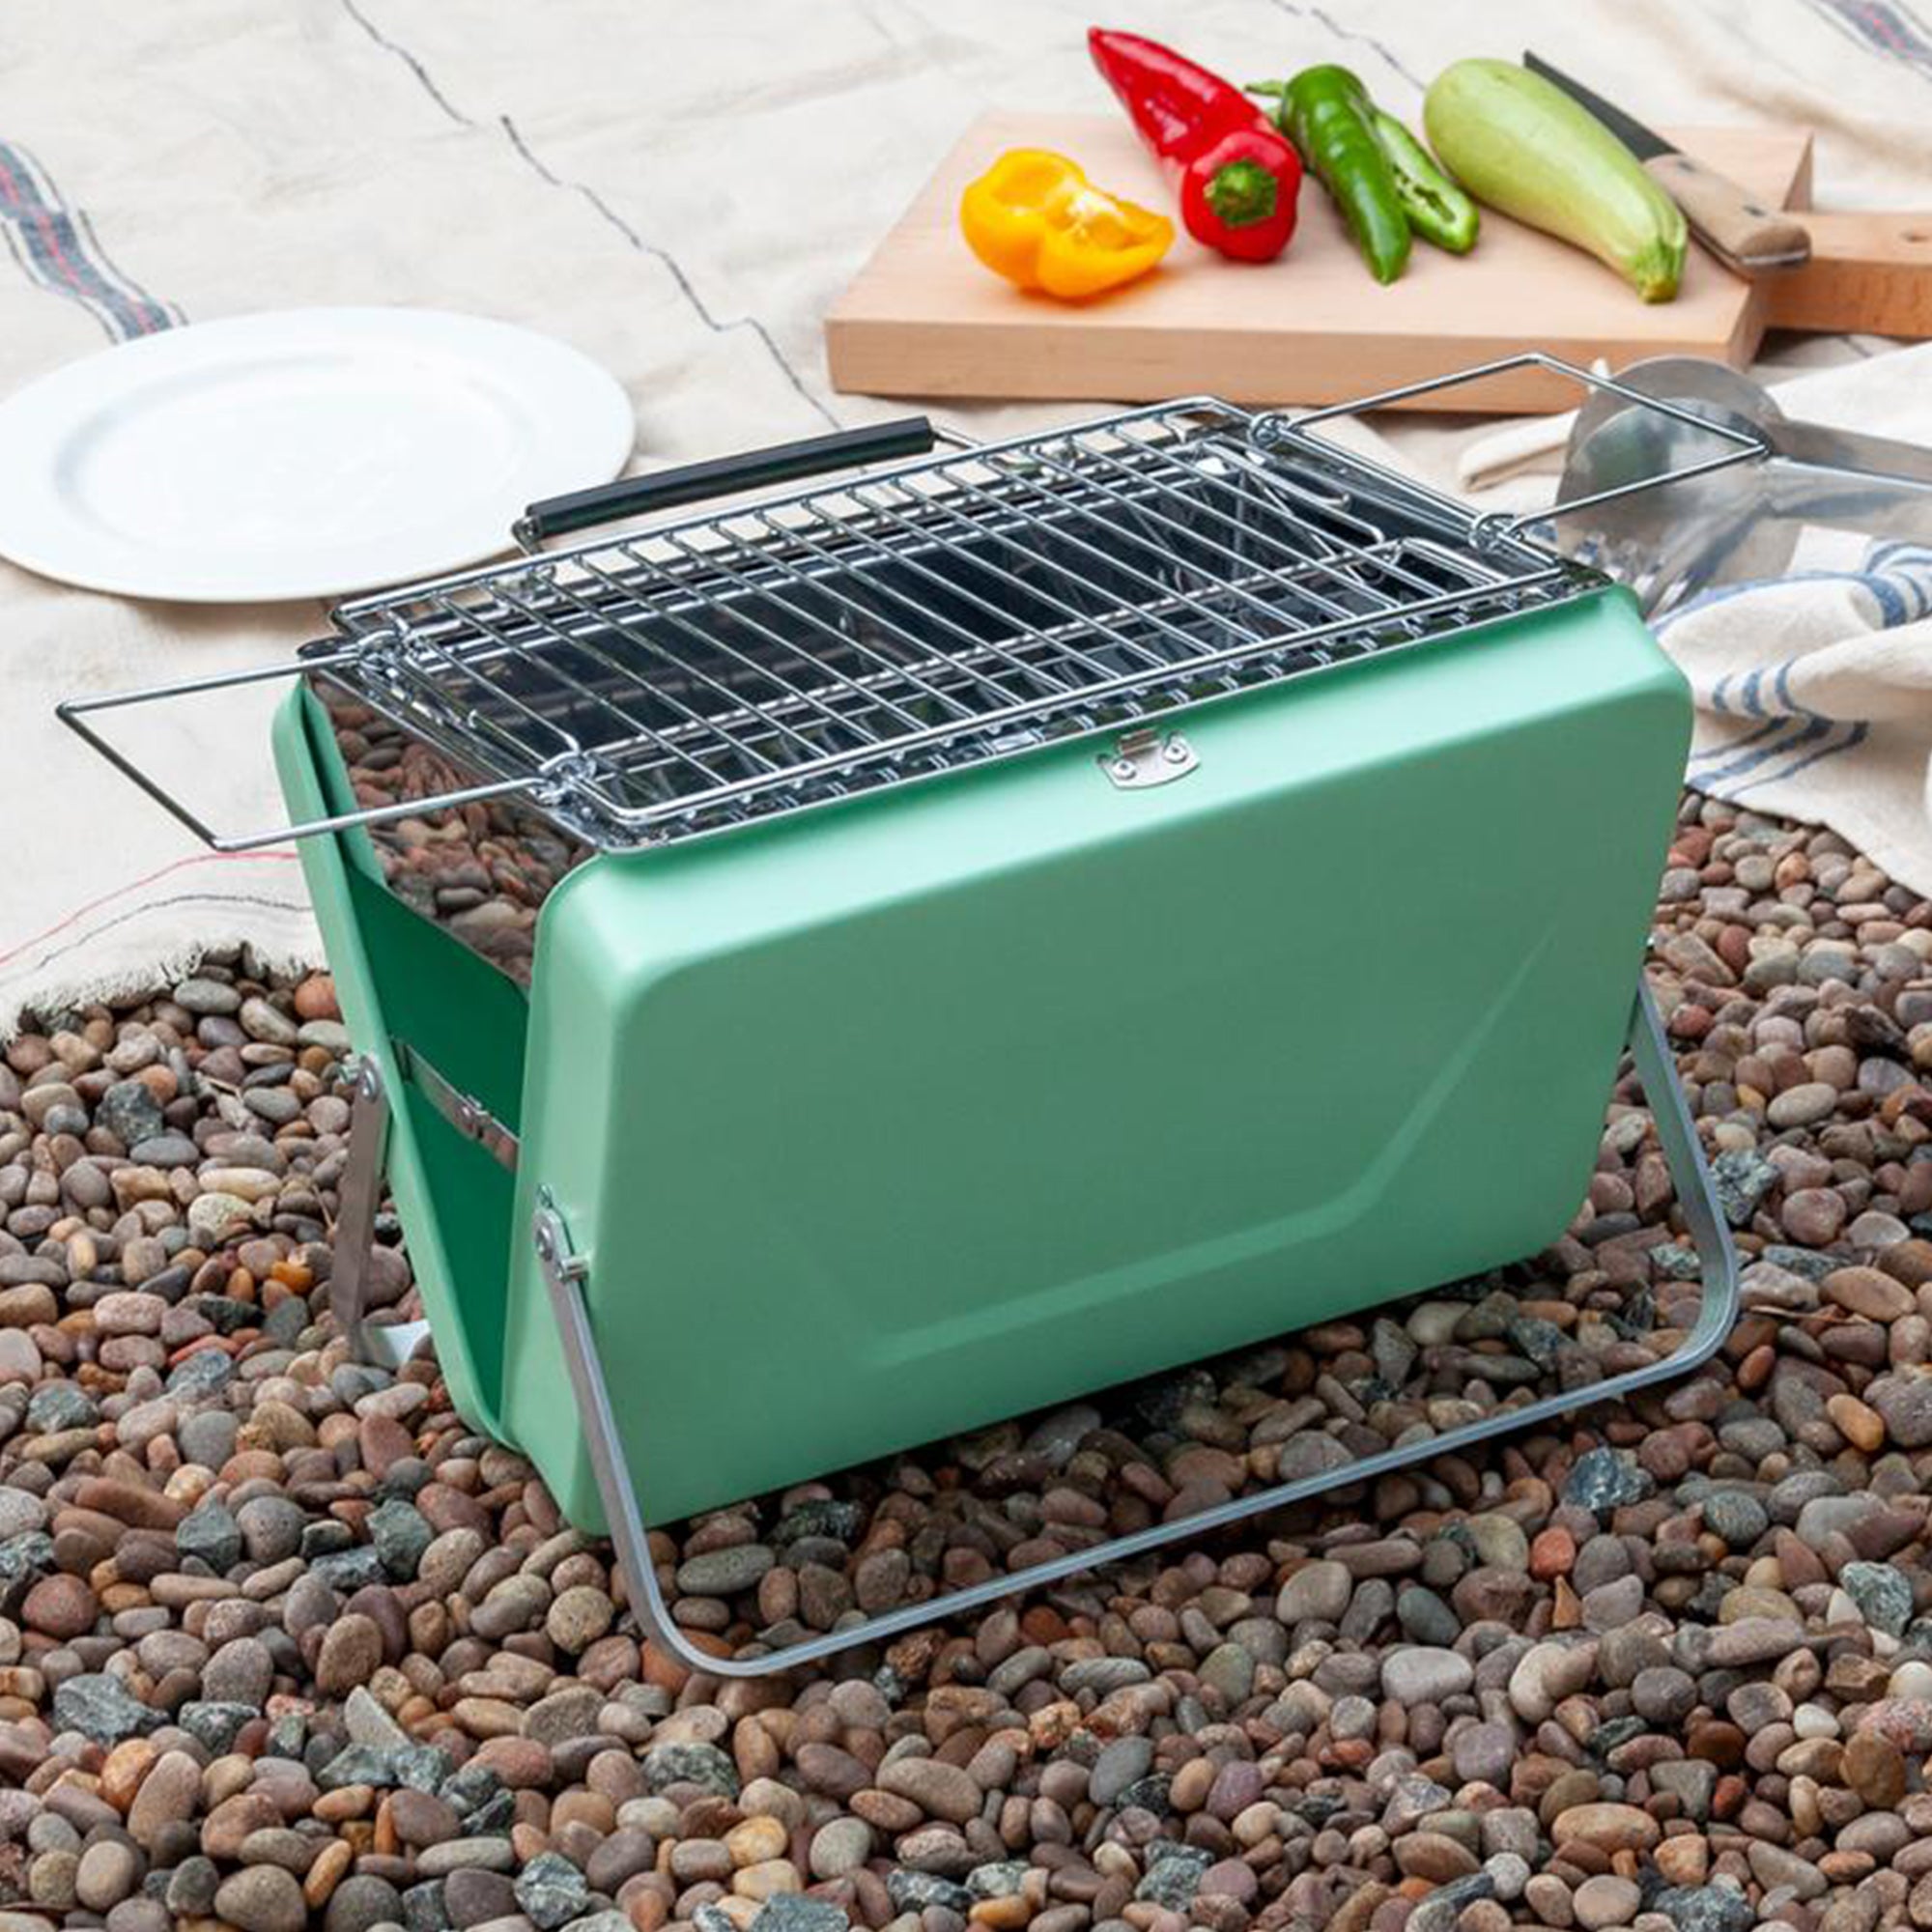 Portable Barbecue for Family Trips - Camping Barbecue - Gift for Dad